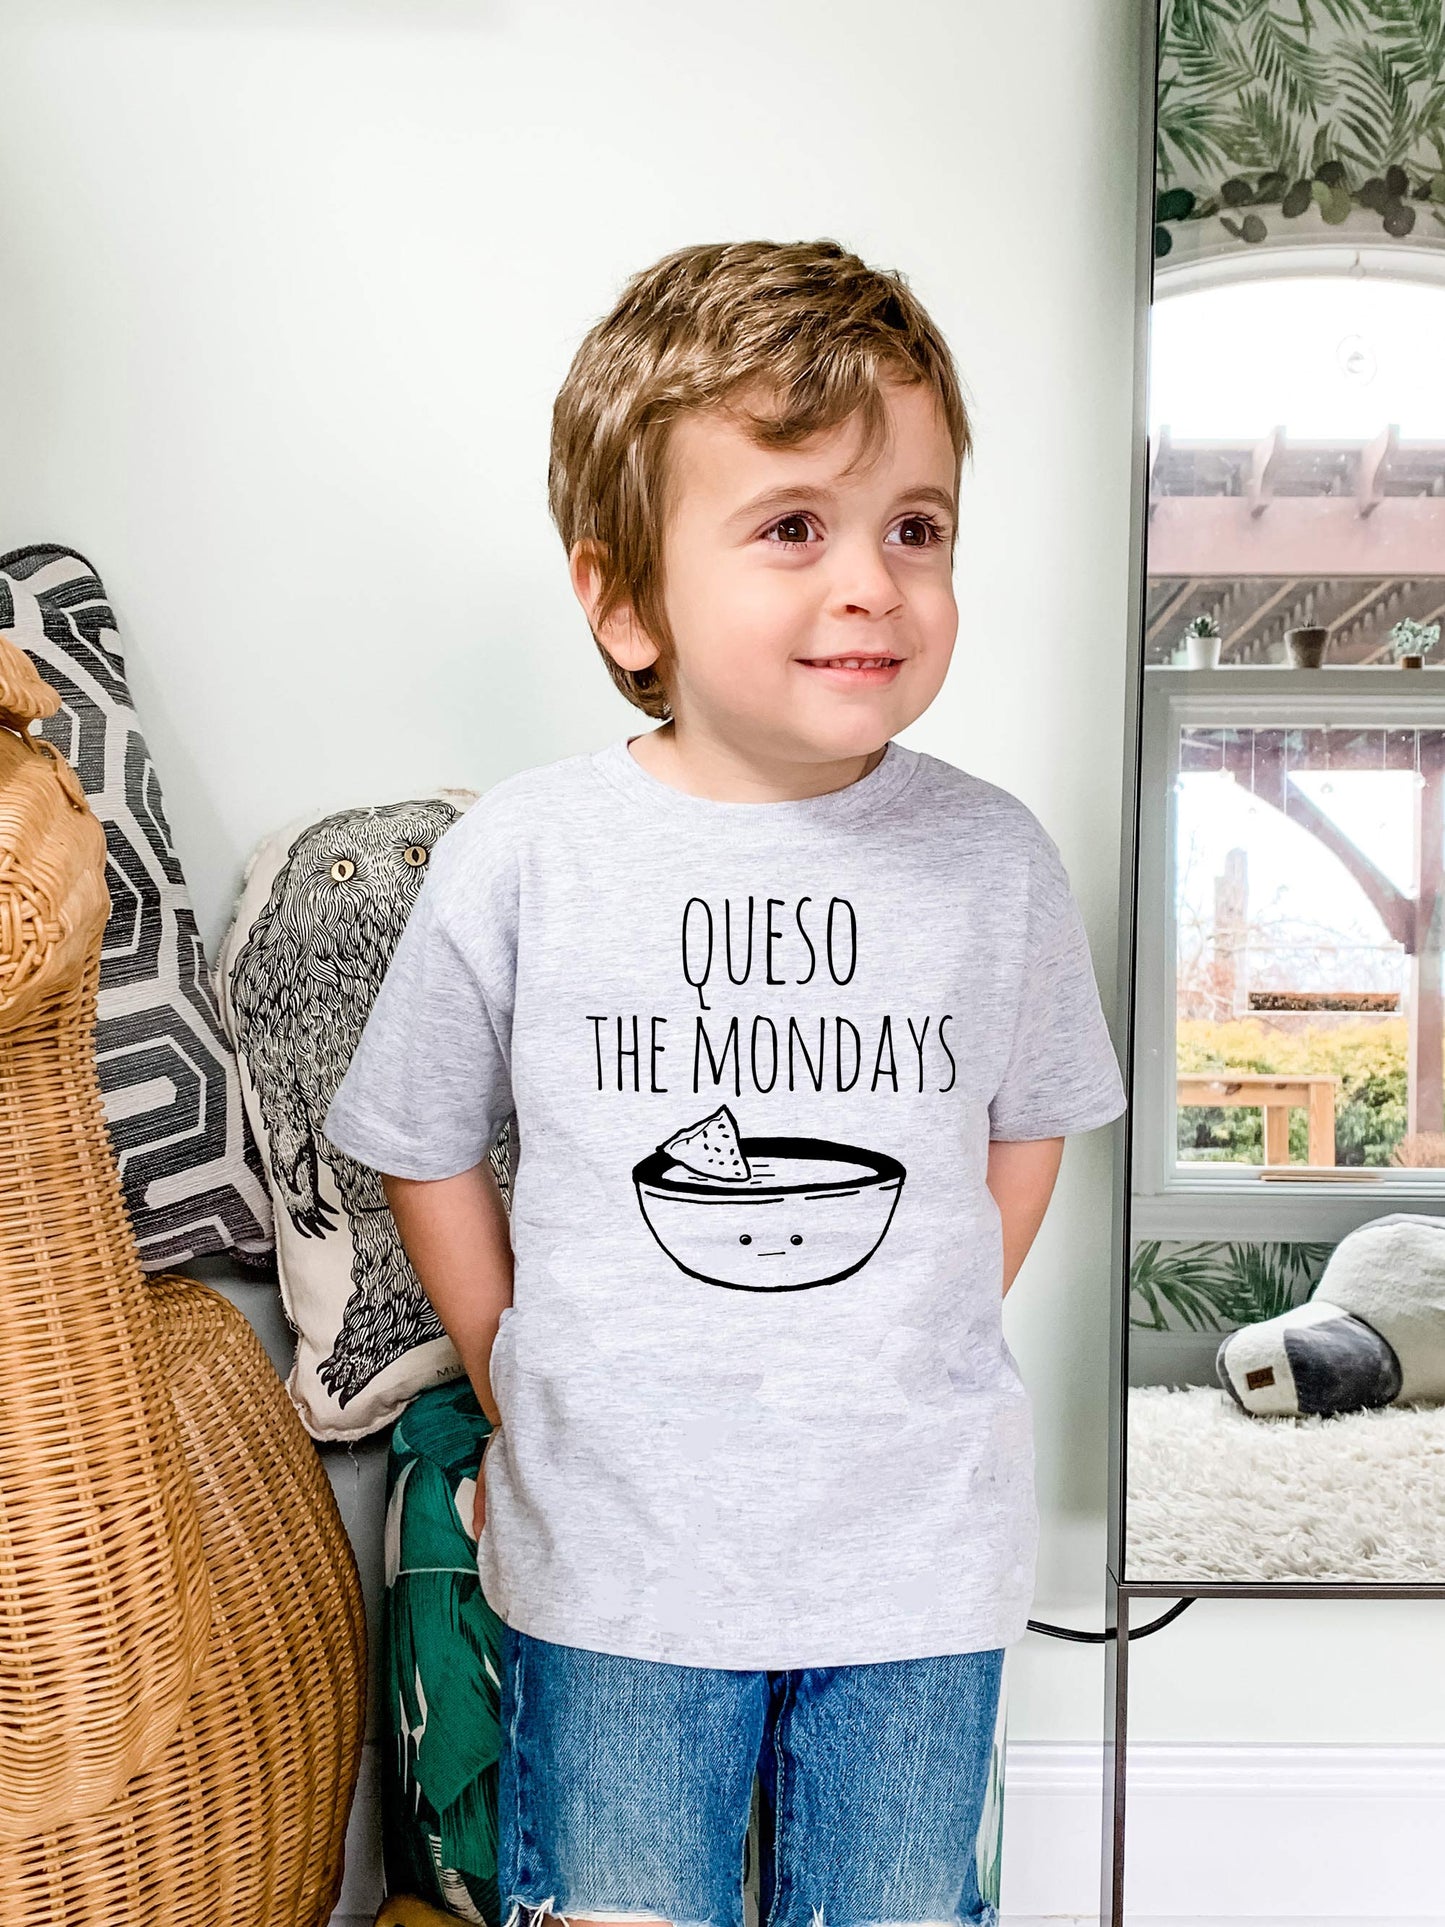 Queso The Mondays (Tacos) - Toddler Tee - Heather Gray